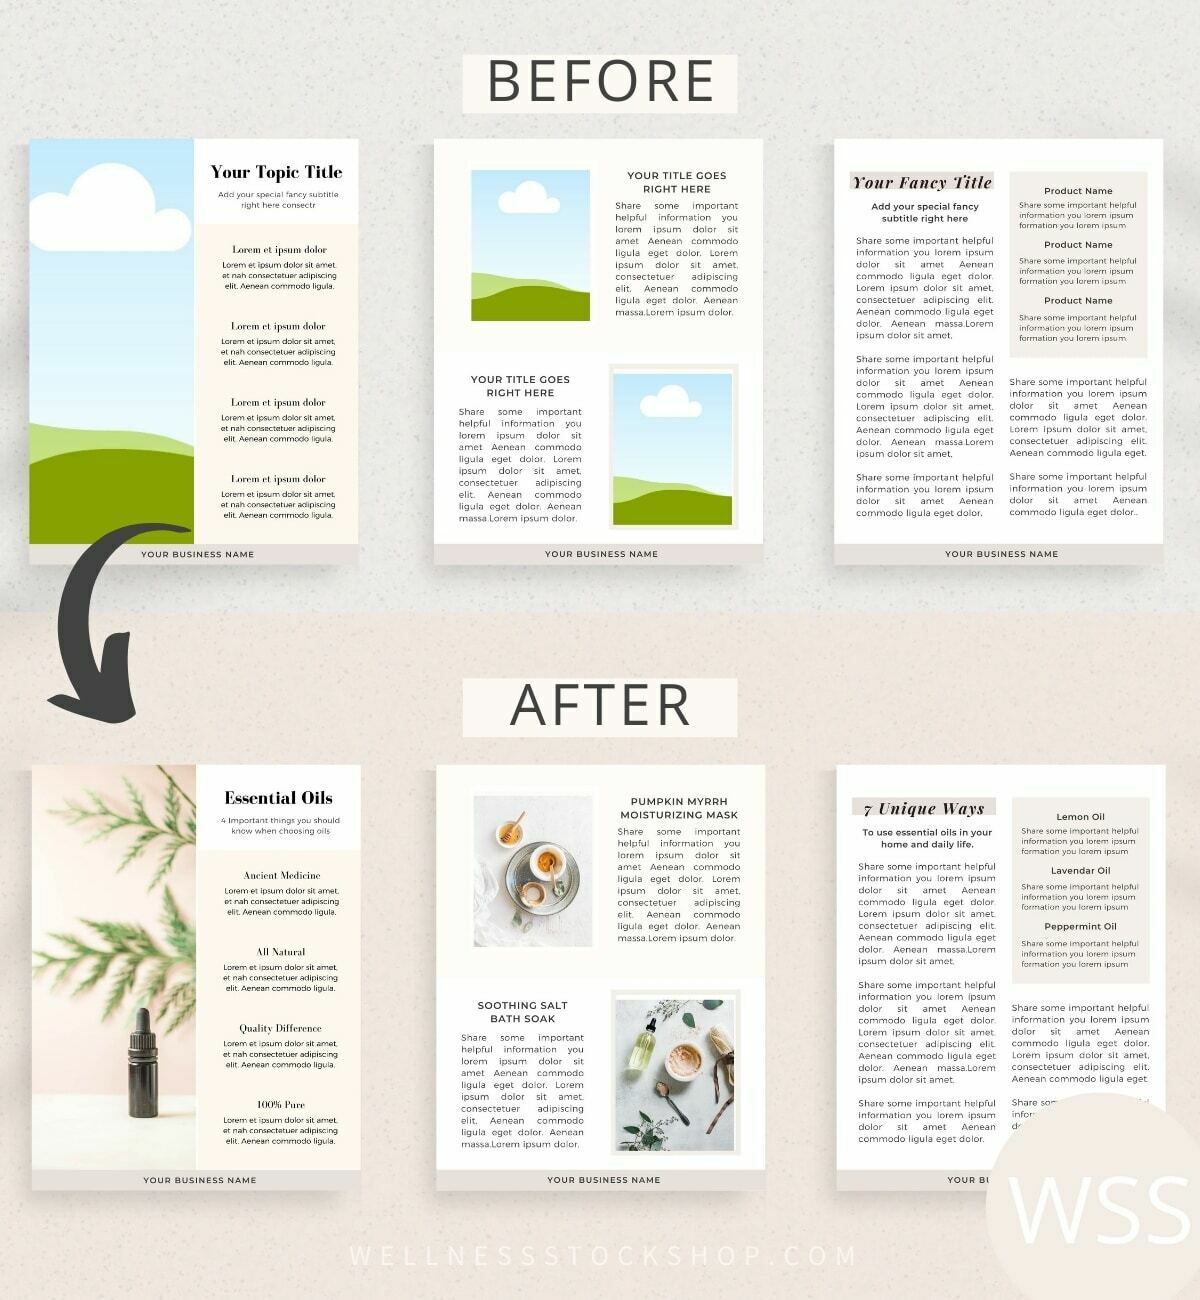 Grab these free Canva template workbook pages for your lead magnet and business